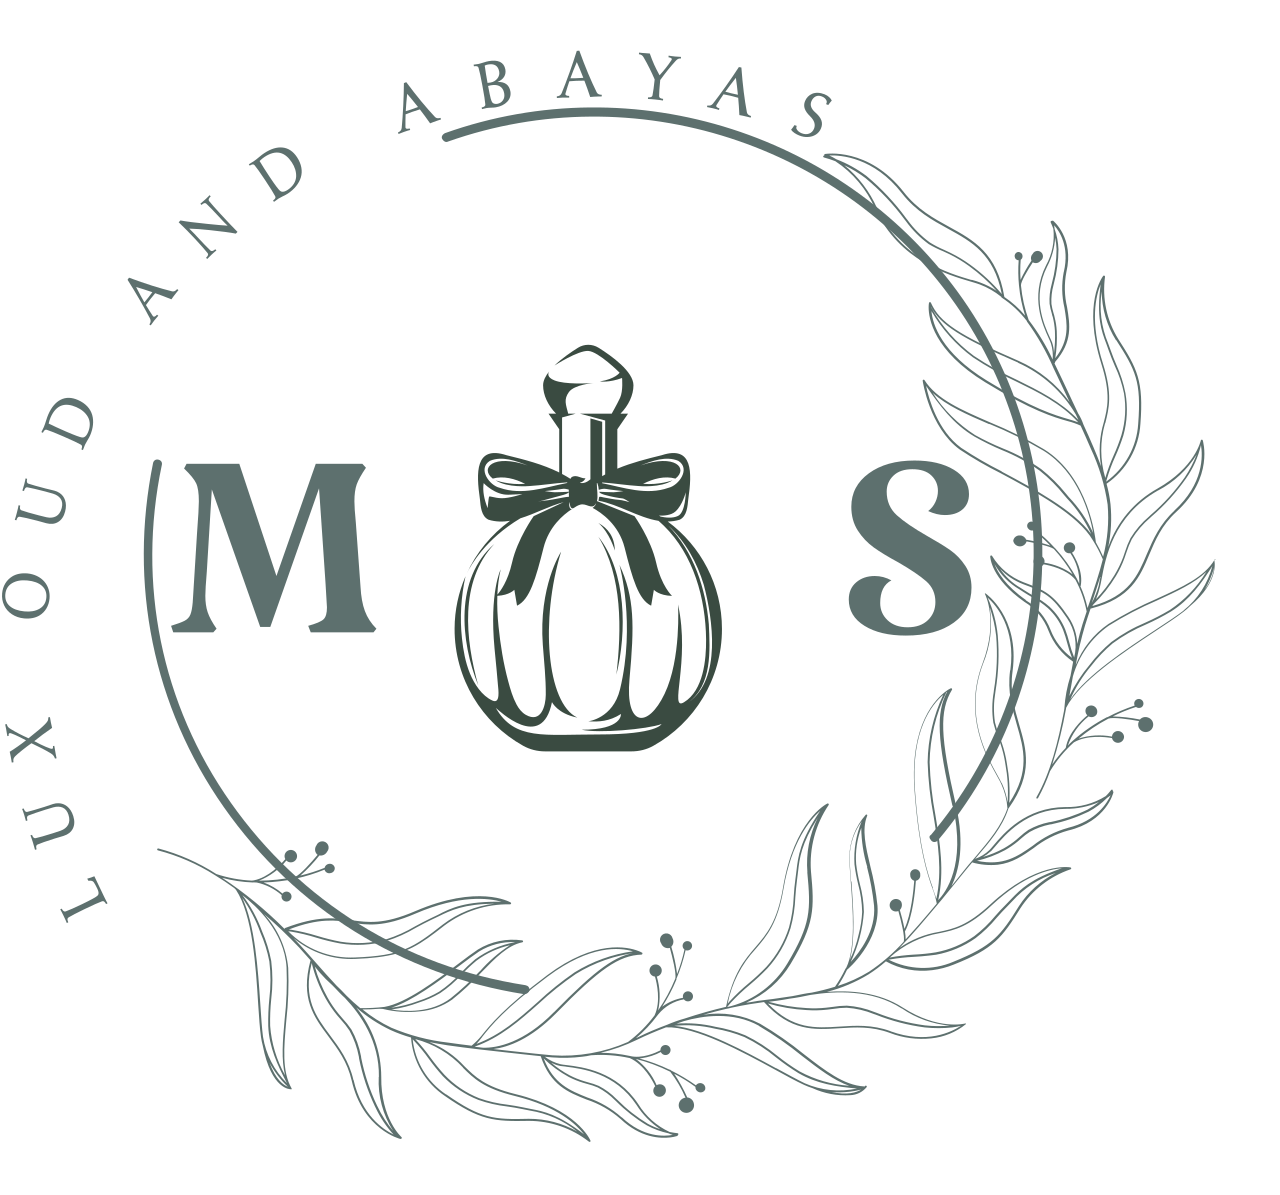 LUX OUD AND ABAYAS's logo